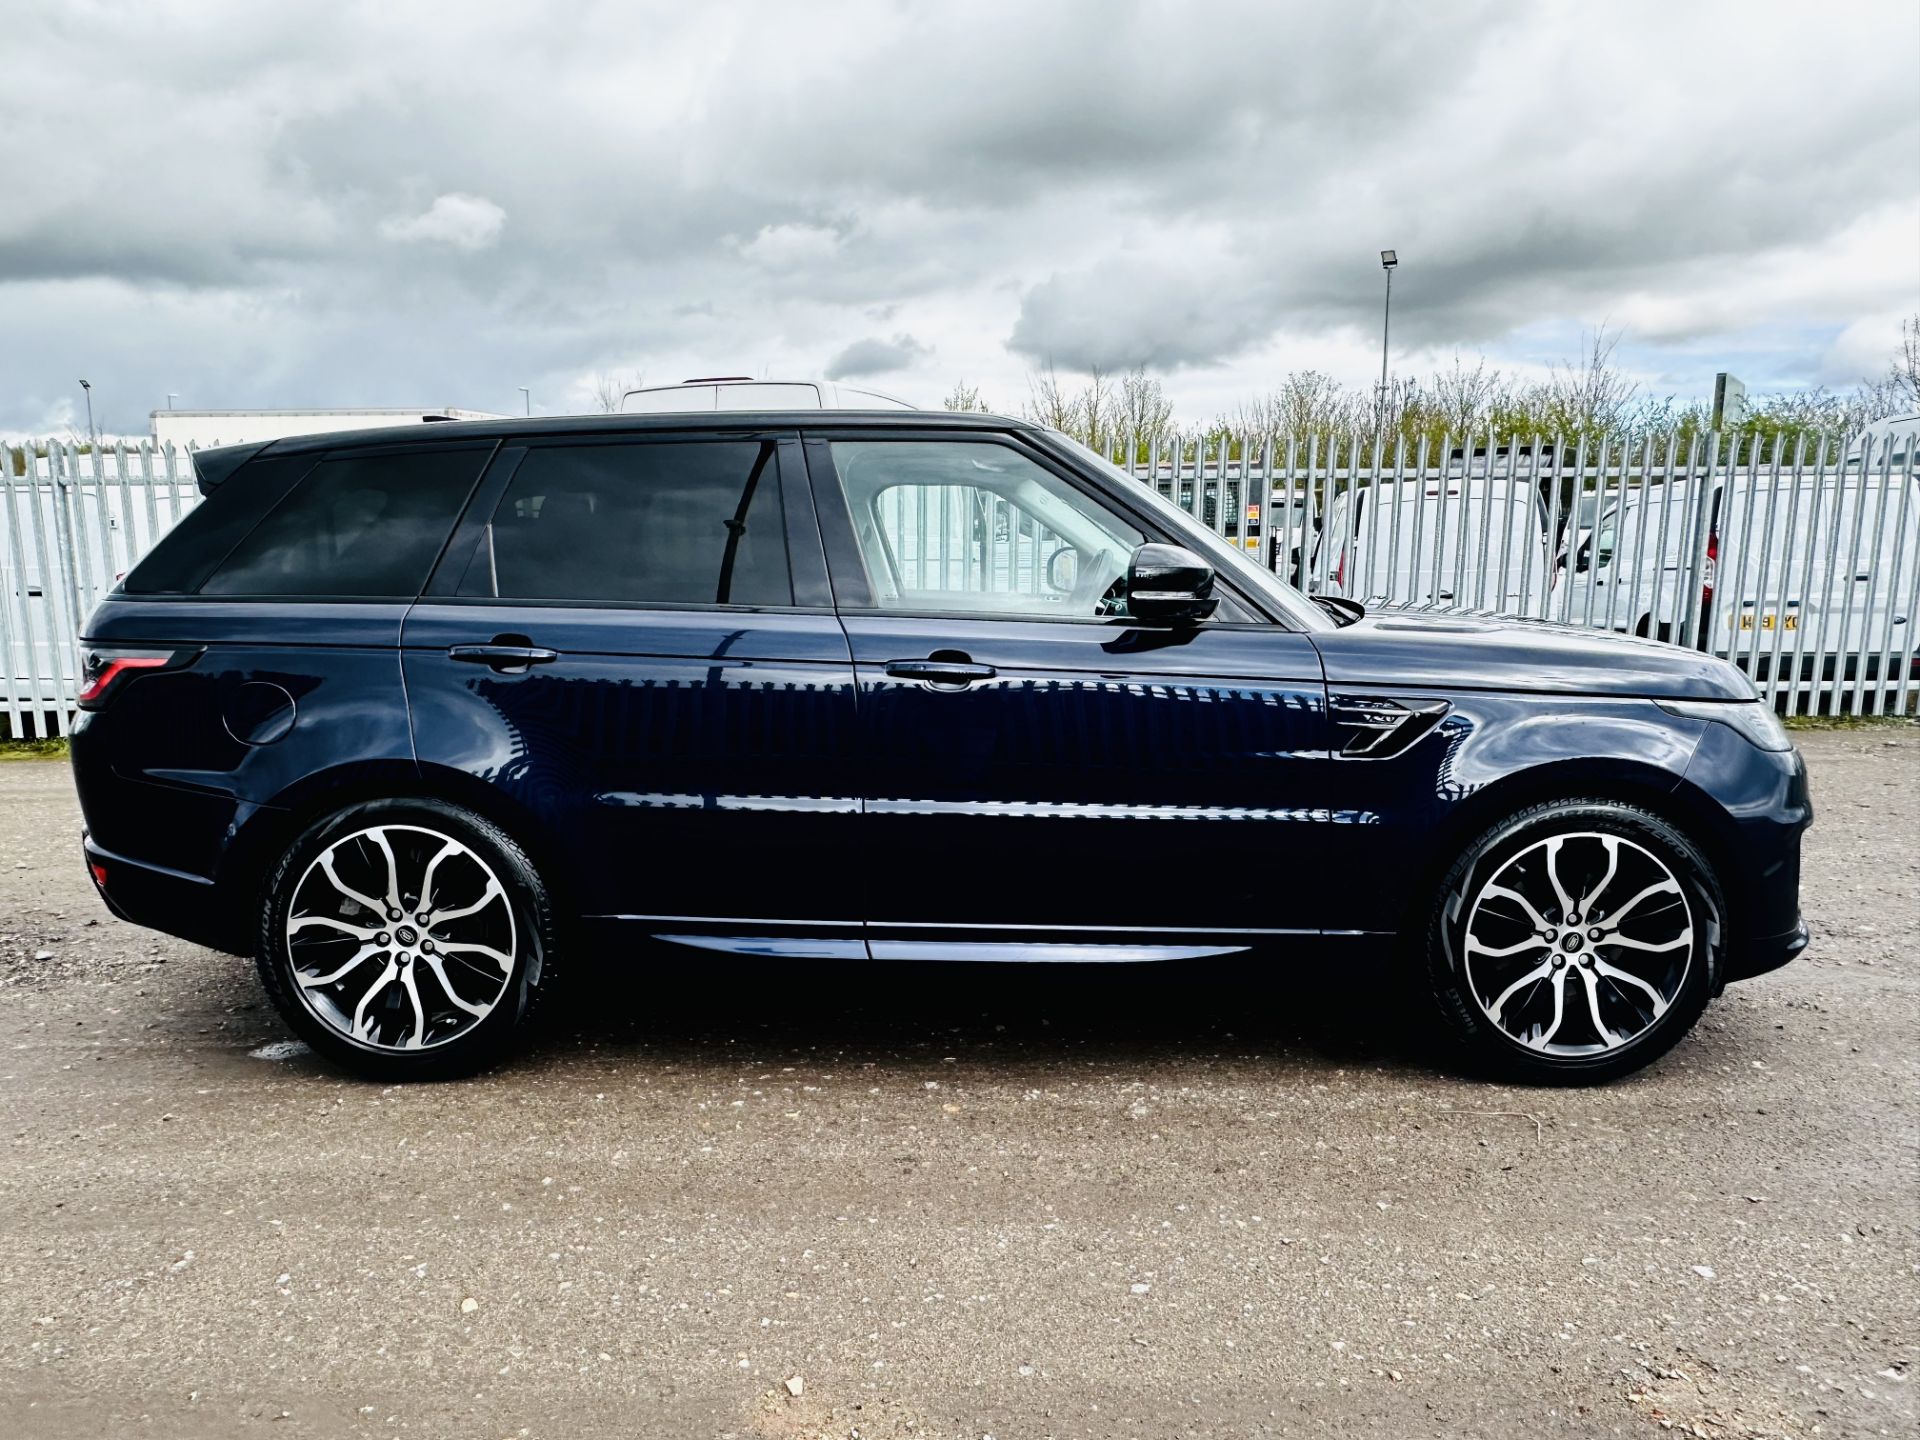 **ON SALE** Land Rover Range Rover Sport 3.0 SDV6 HSE DYNAMIC 2020 '69 Reg'- Only 47544 Miles - Image 13 of 30